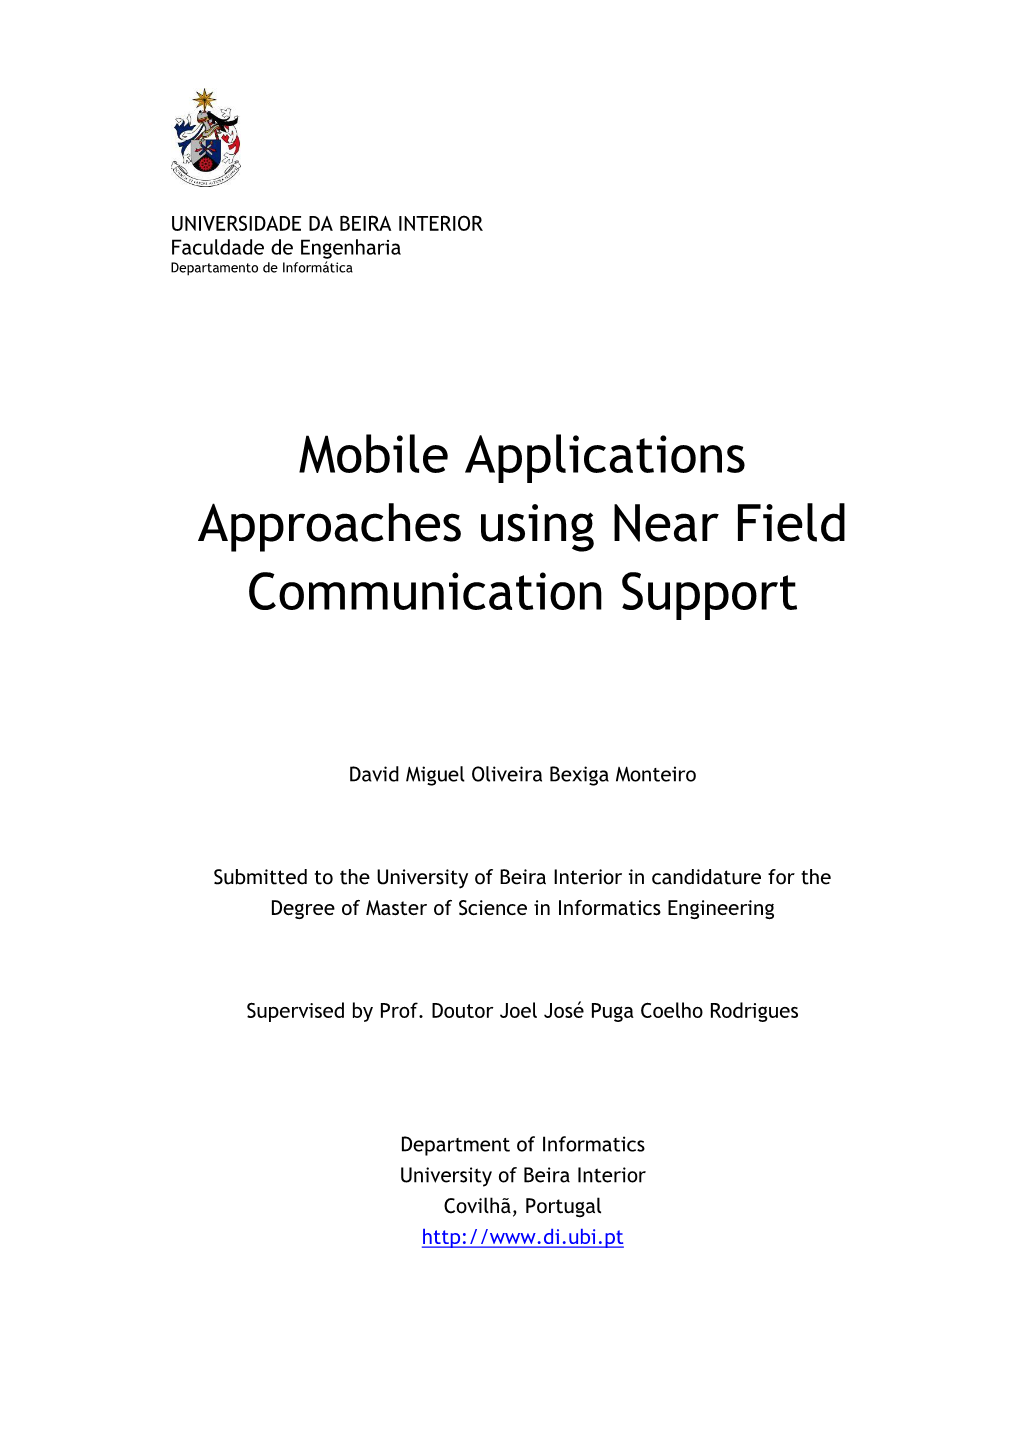 Mobile Applications Approaches Using Near Field Communication Support